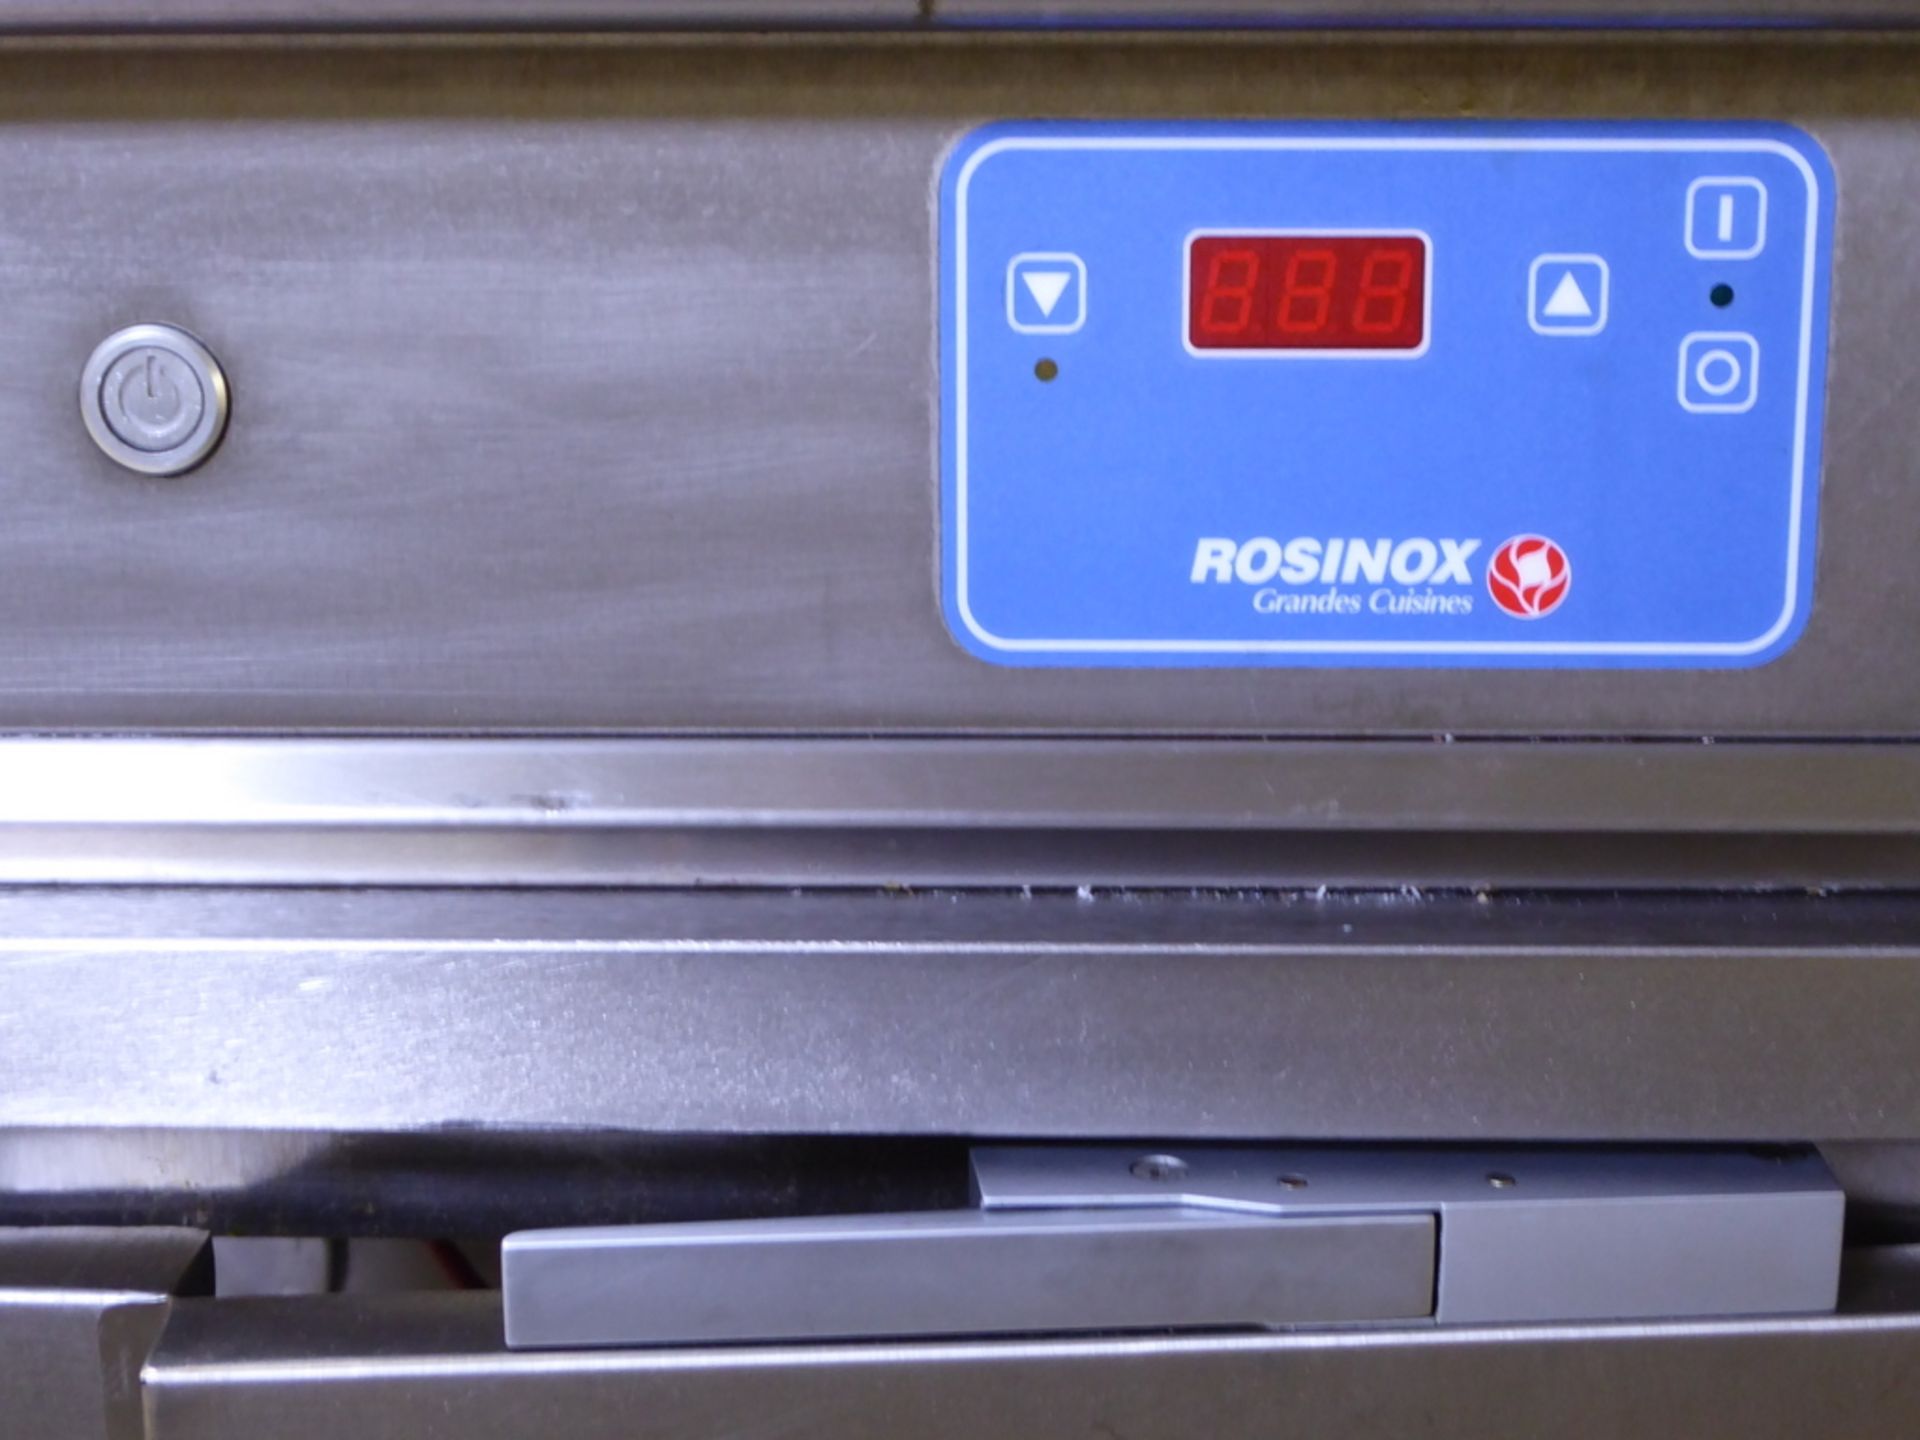 Rosinox vario pan 35L Double chip Fryer 400V 3 Phase, Comes with Drainer 80 x 93 x 106cm - Image 6 of 7